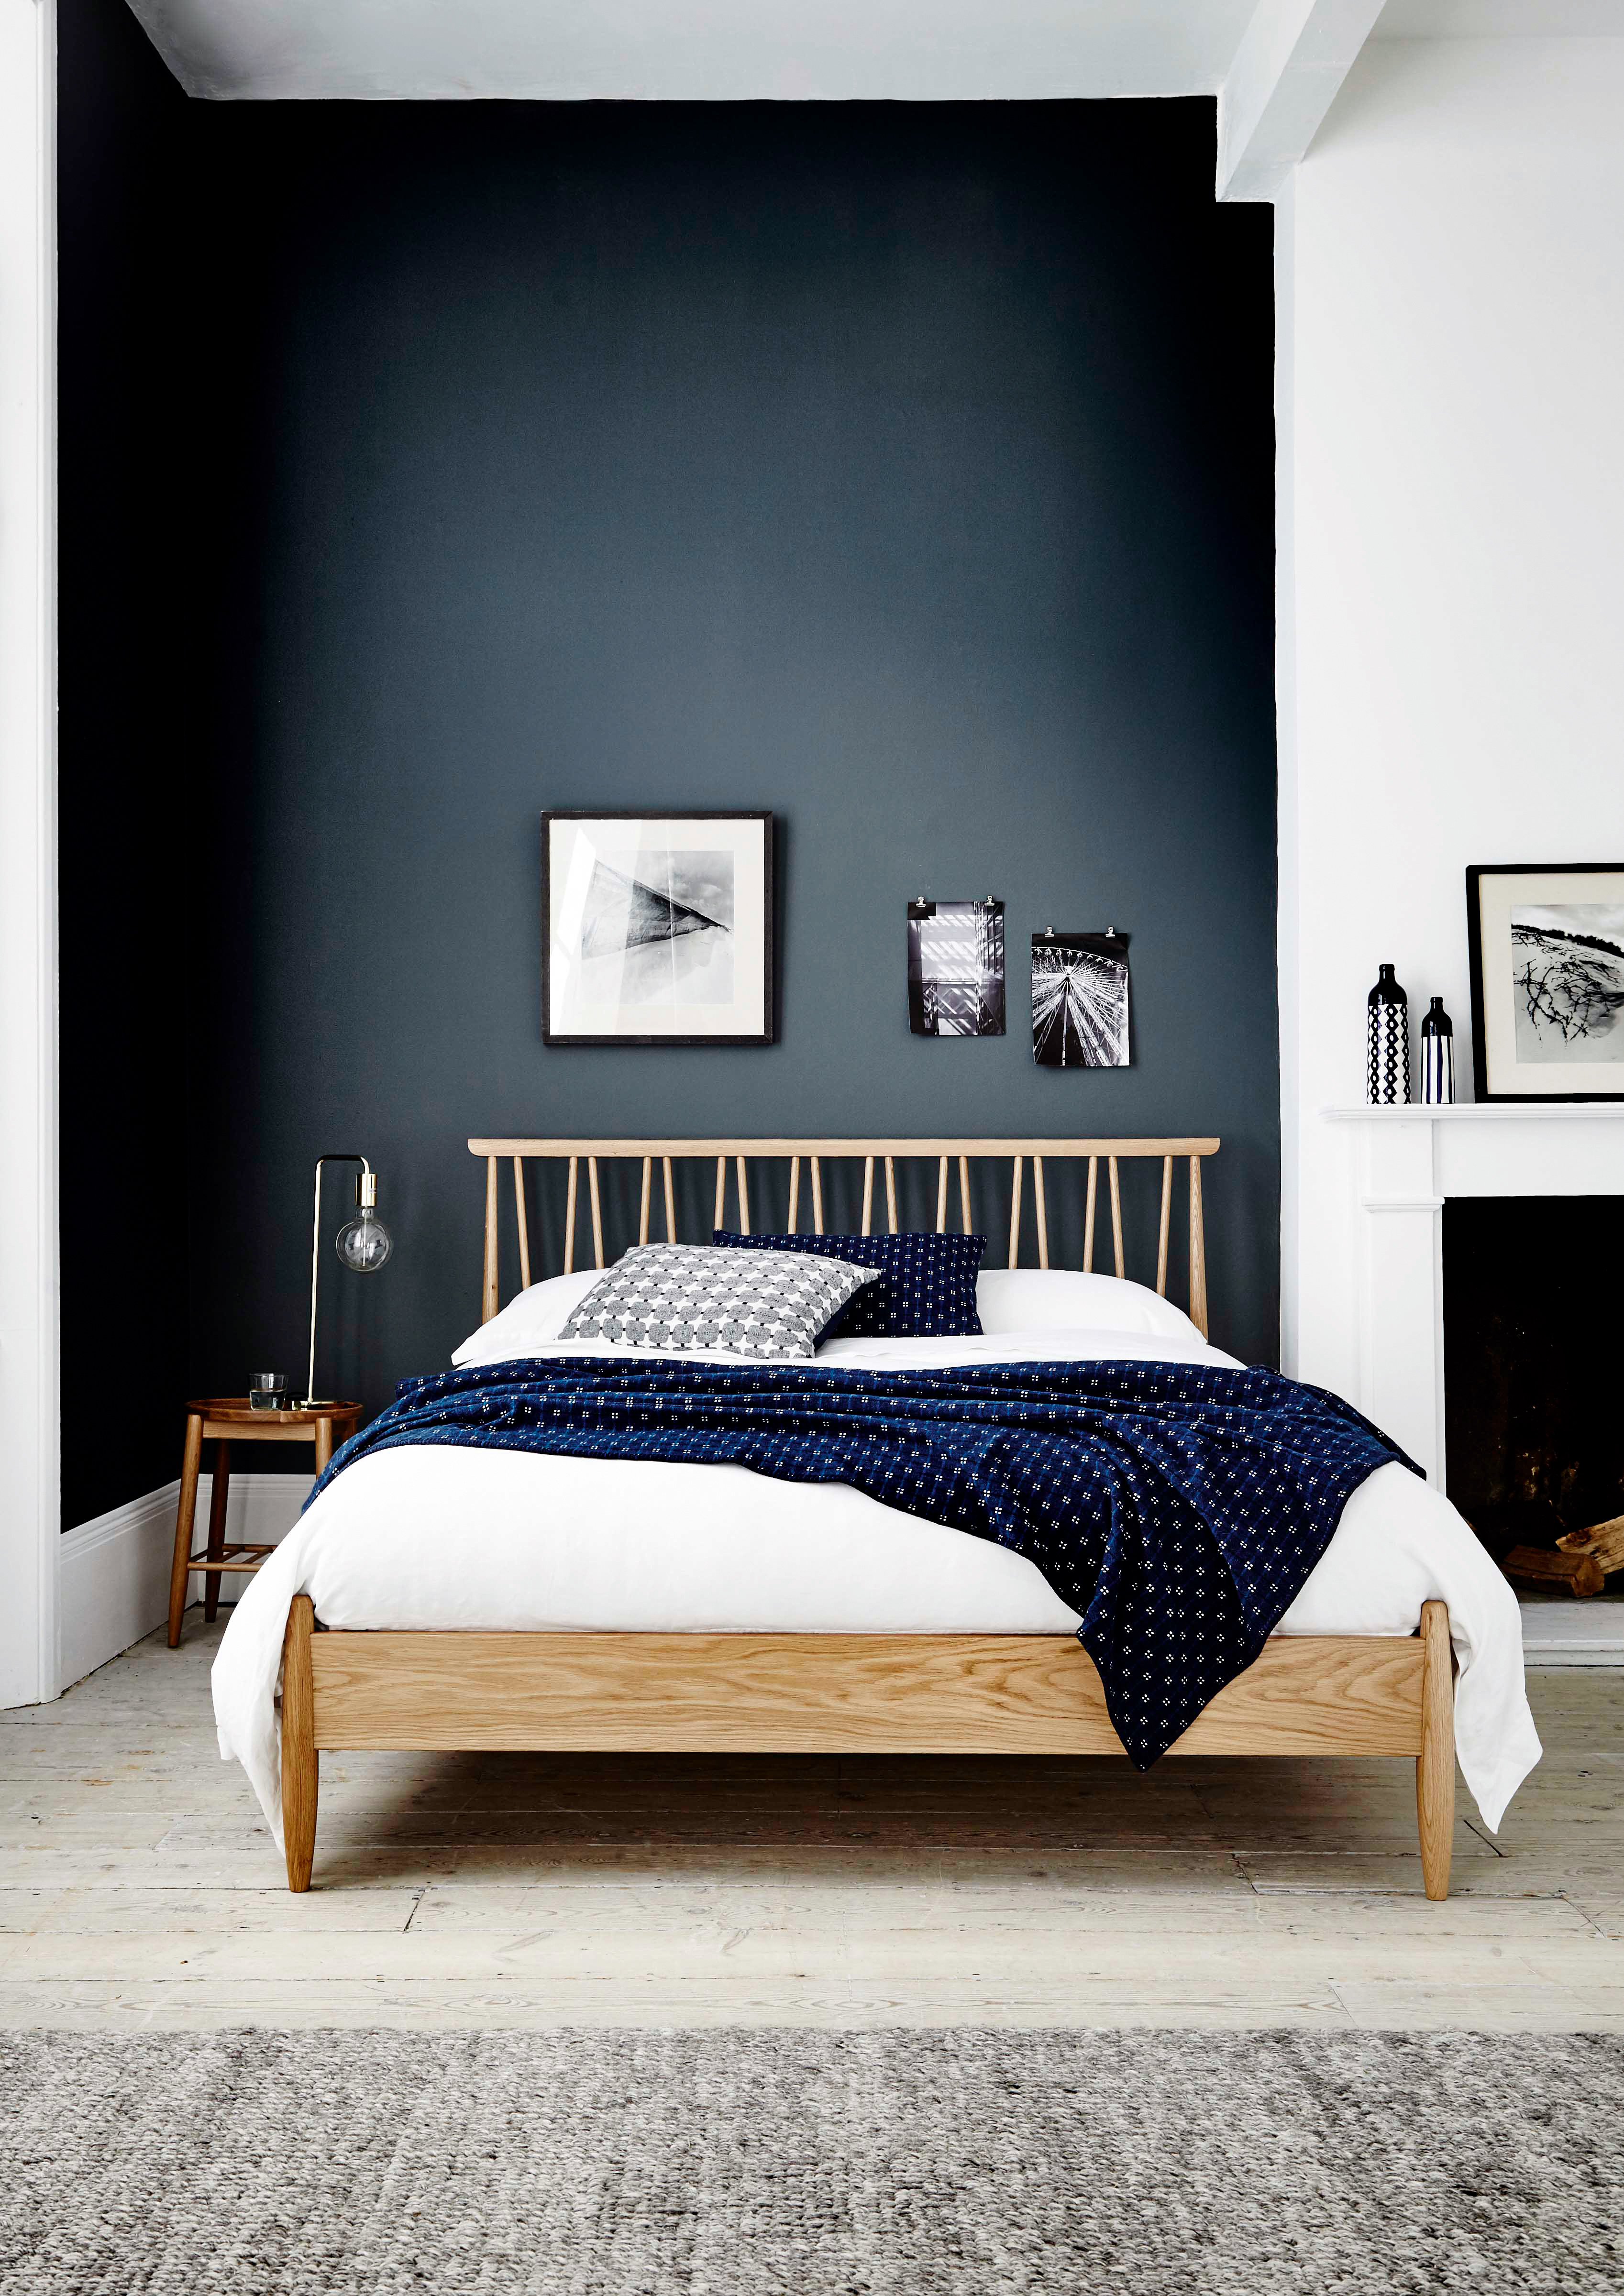 A bedroom with dark blue wall decor, double bed, Edison-style table lamp and grey runner rug